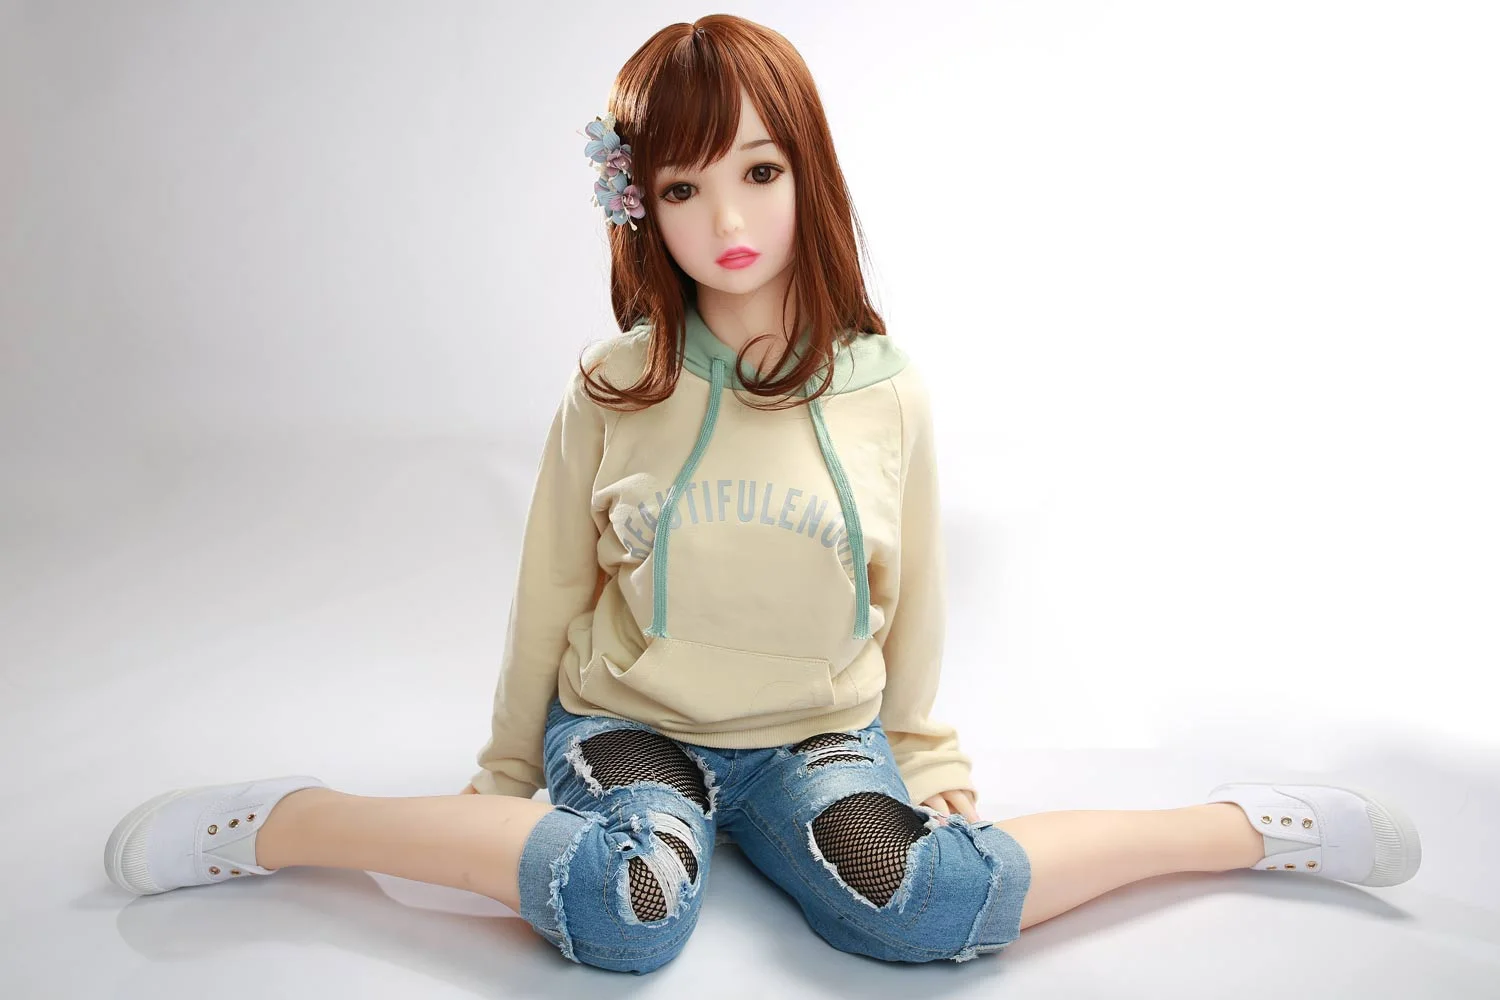 Sex doll sitting with legs apart